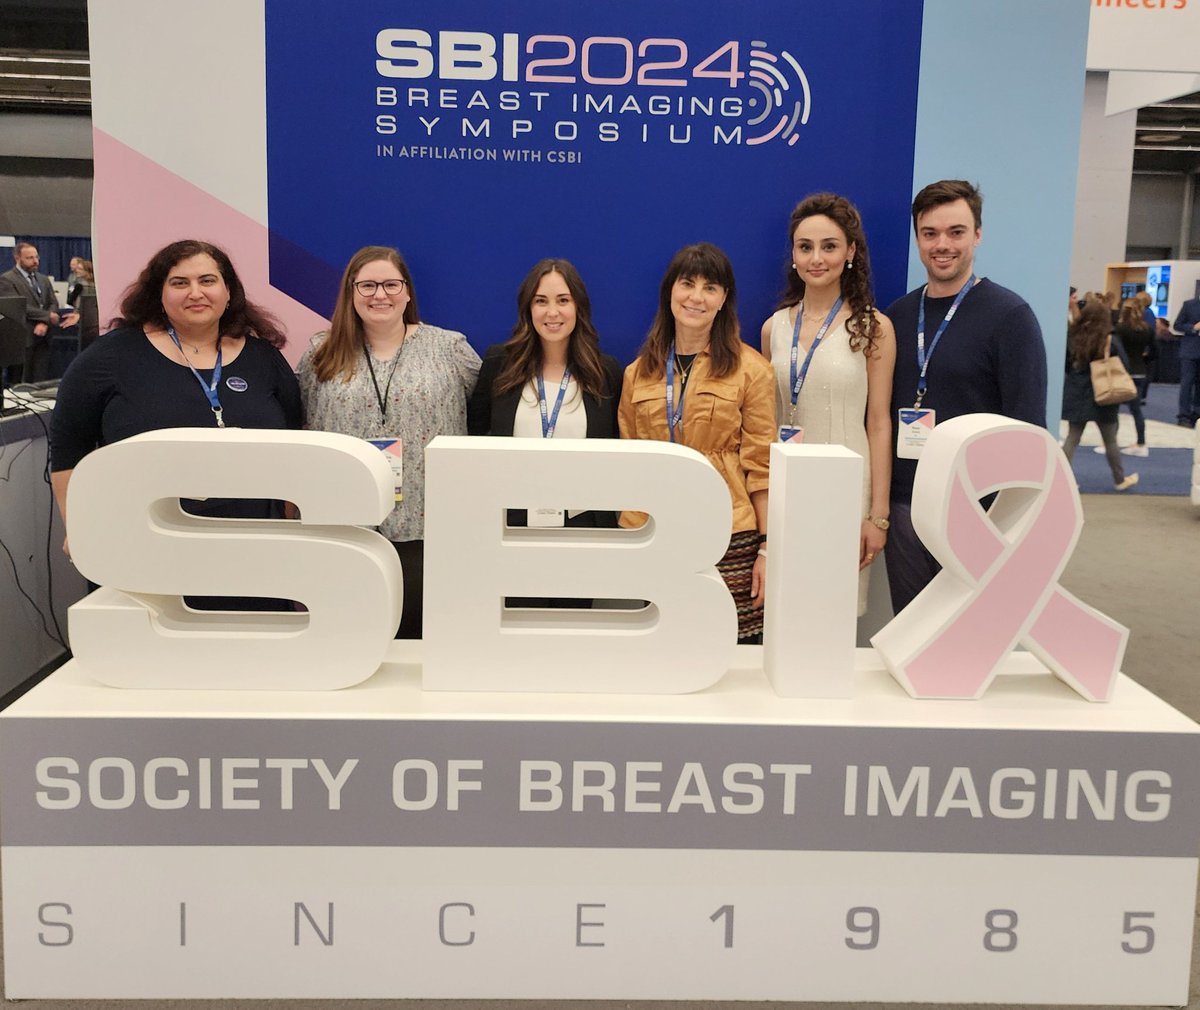 Having a great time with our wonderful @UHRadiology breast imaging family at #SBI2024. So proud of being a member of this team. @UHhospitals @CWRUSOM #radres #radfellow #RadLeaders #BreastRad @DonnaPlecha @TavanaShahrzad @kstephens17237